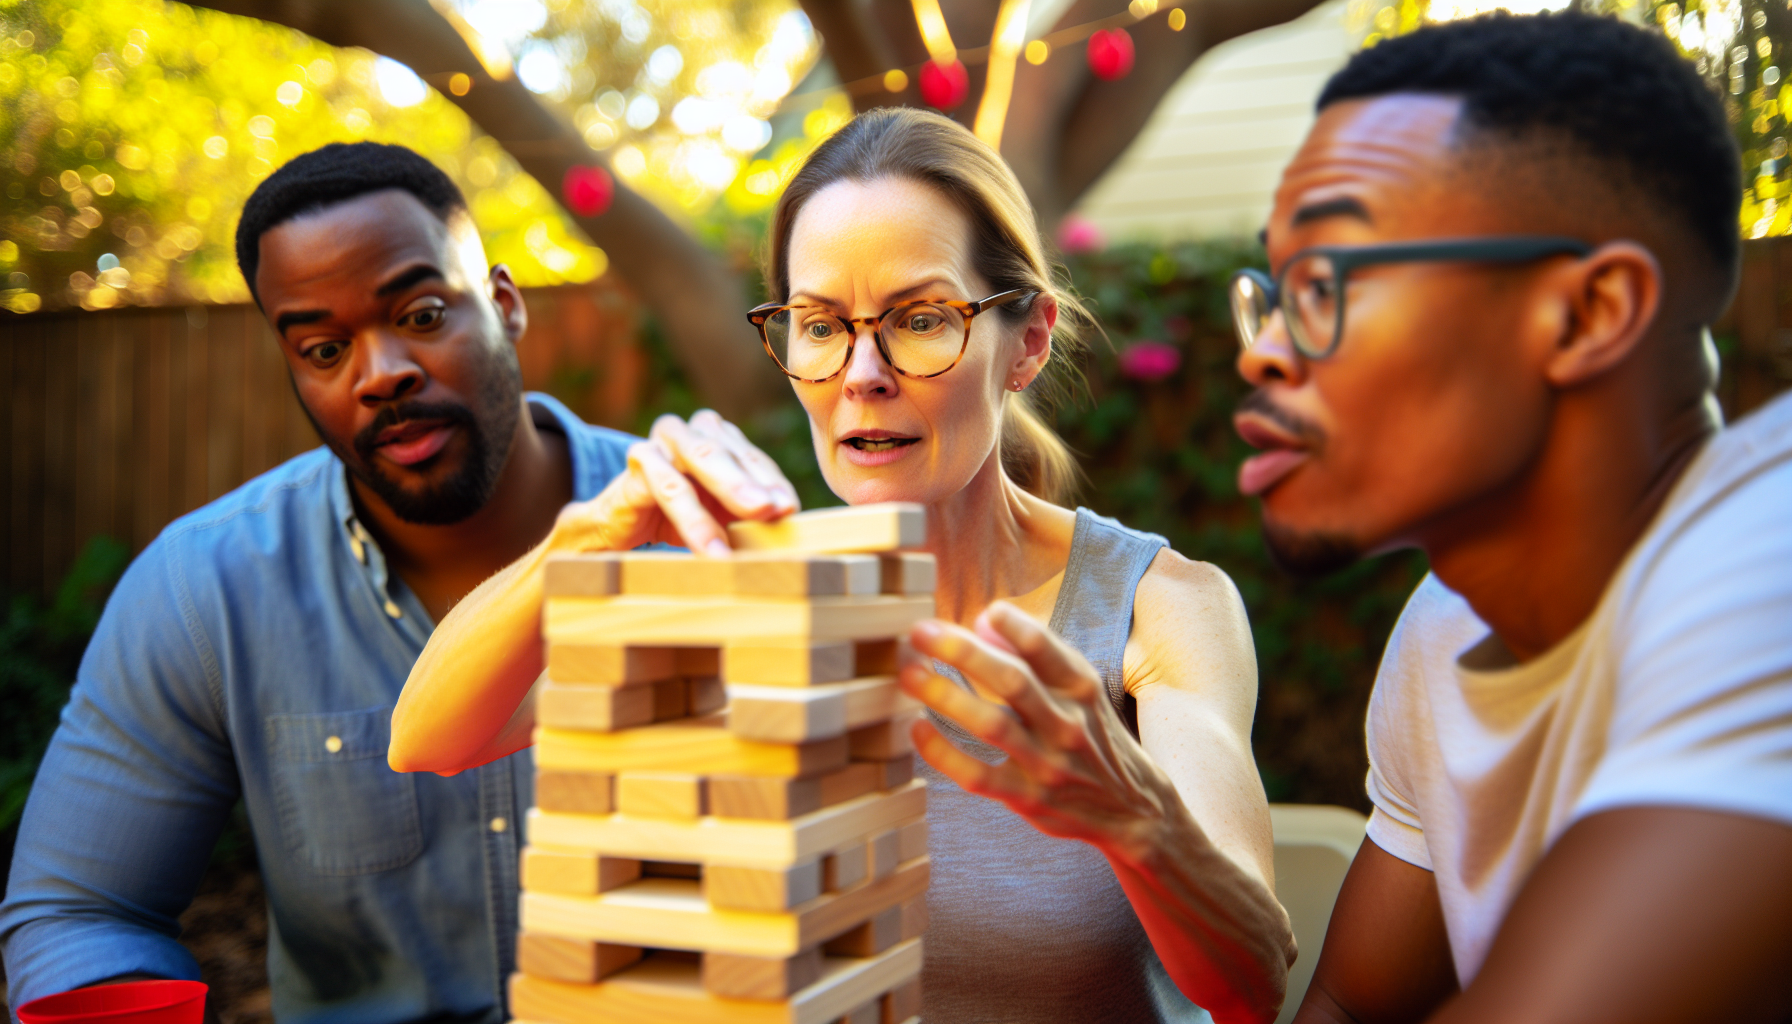 A close-up of a tense moment during a game of Giant Jenga